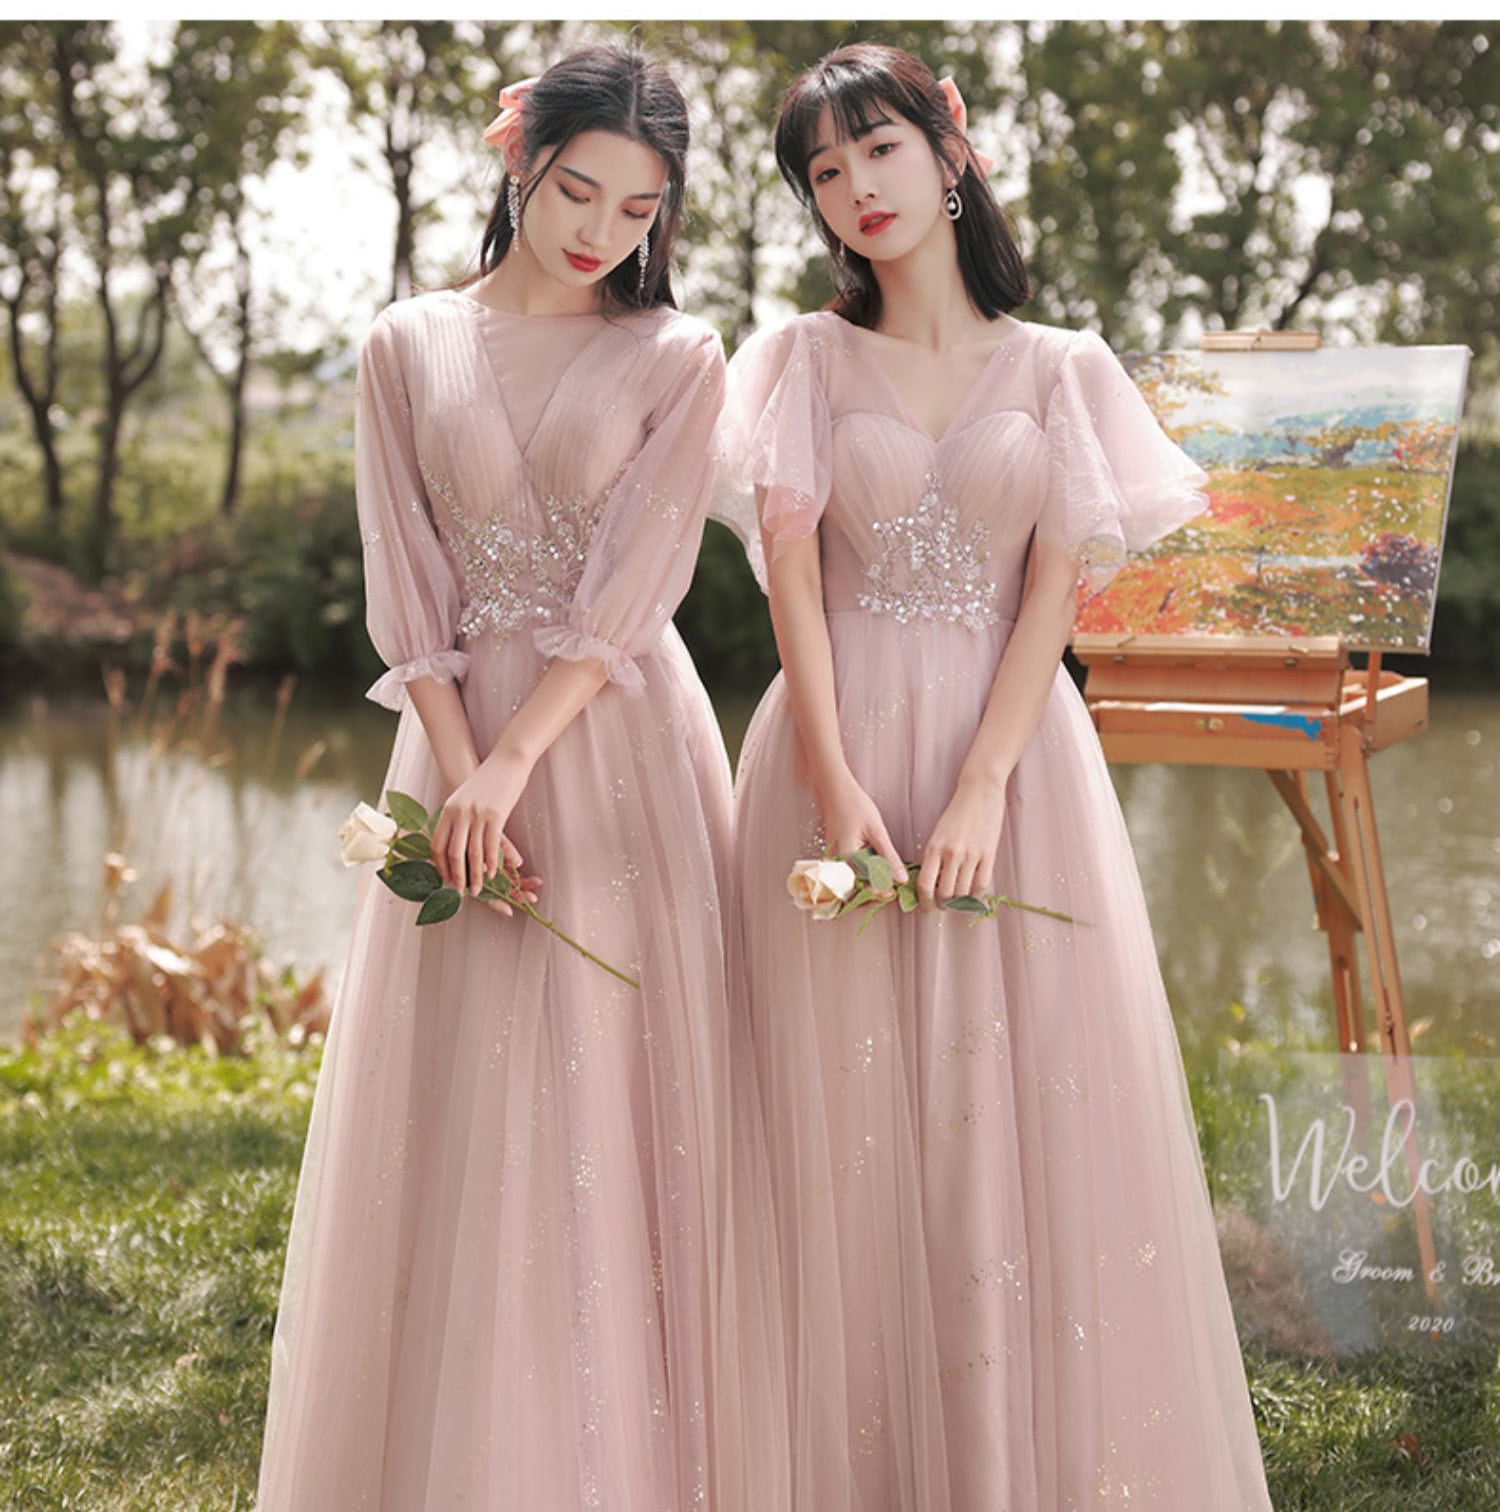 Romantic-Pink-Bridal-Party-Dress-Elegant-Occasions-Formal-Gown12.jpg